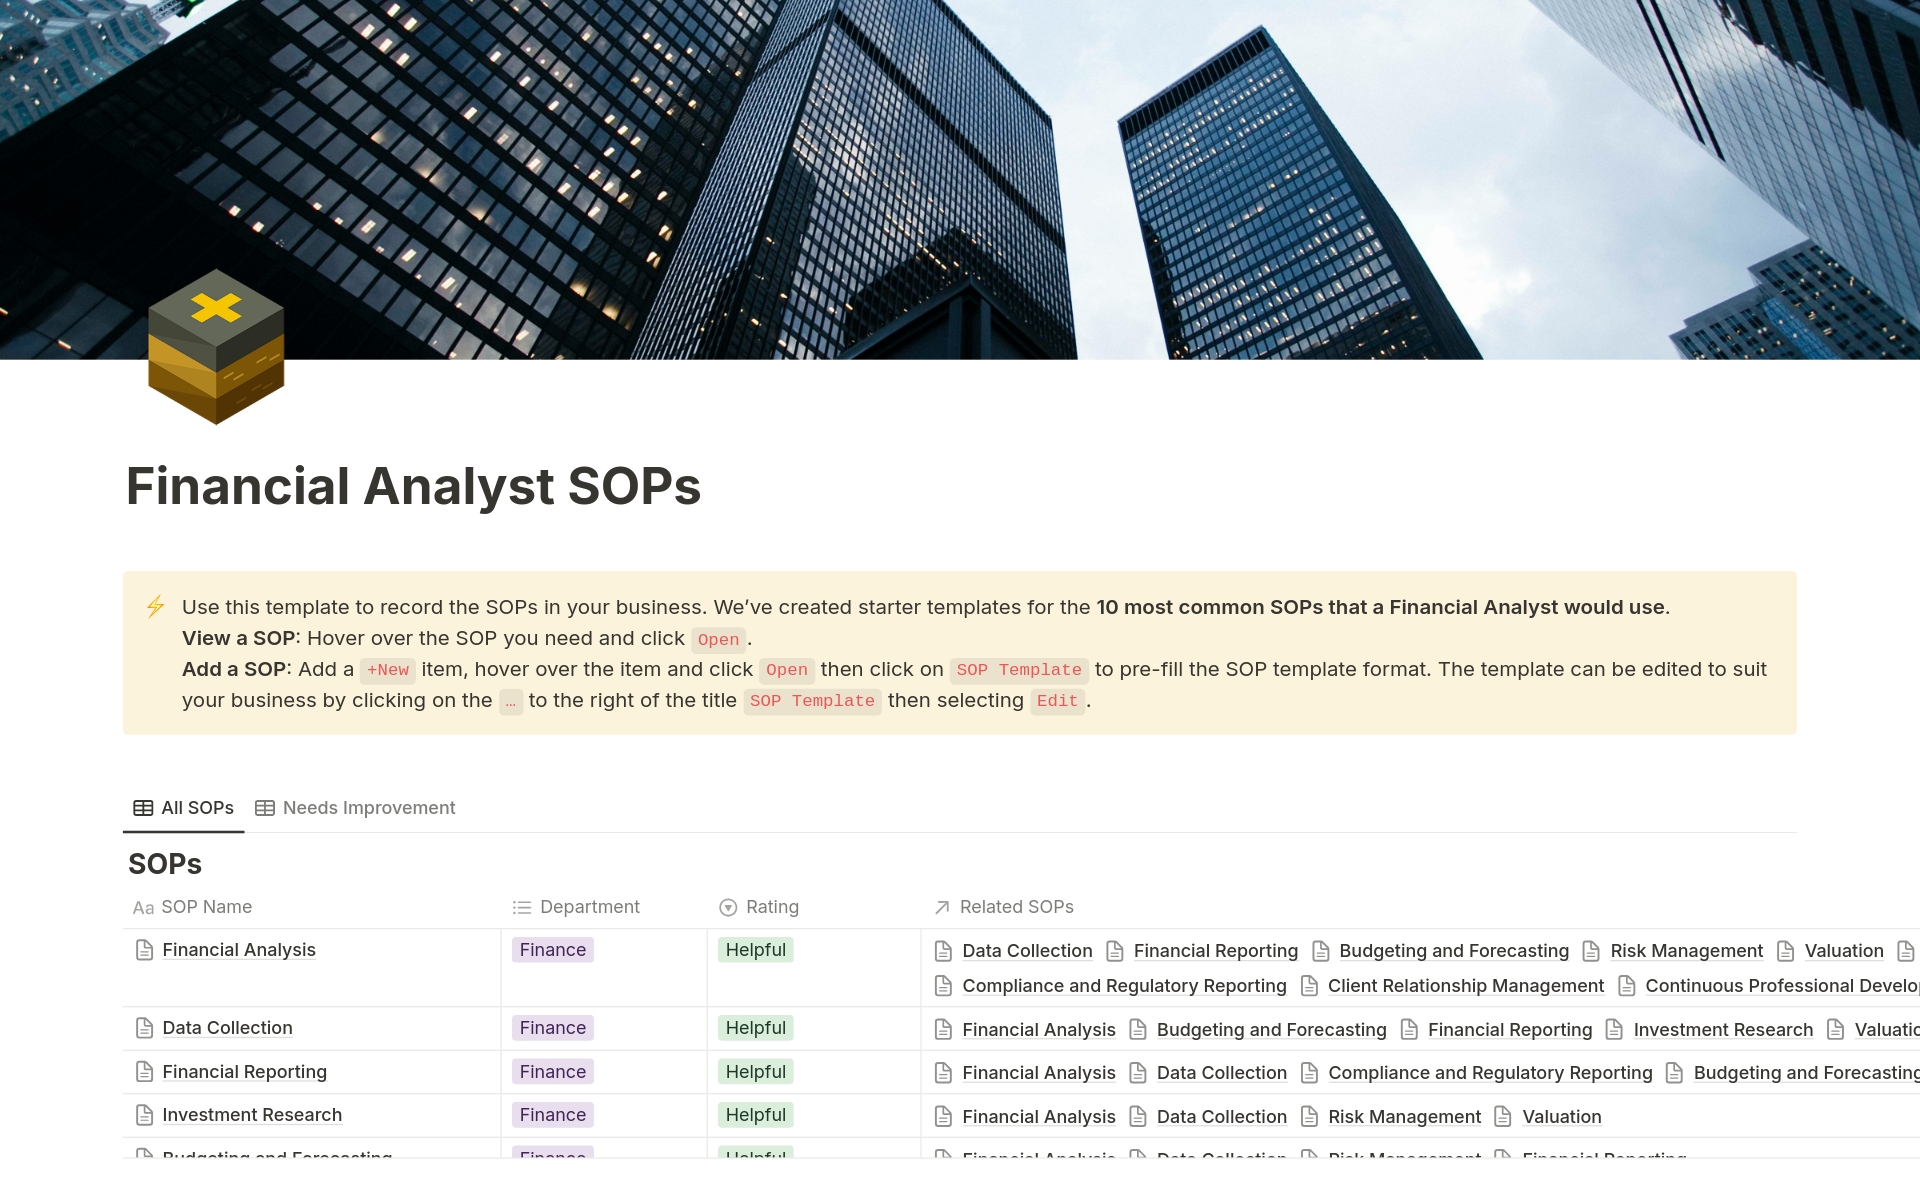 This template contains standard operating procedures (SOPs) for financial analysts. It covers financial analysis, data collection, reporting, investment research, budgeting and more. Includes 20+ pages of best practice SOPs to save you 10+ hours of research.